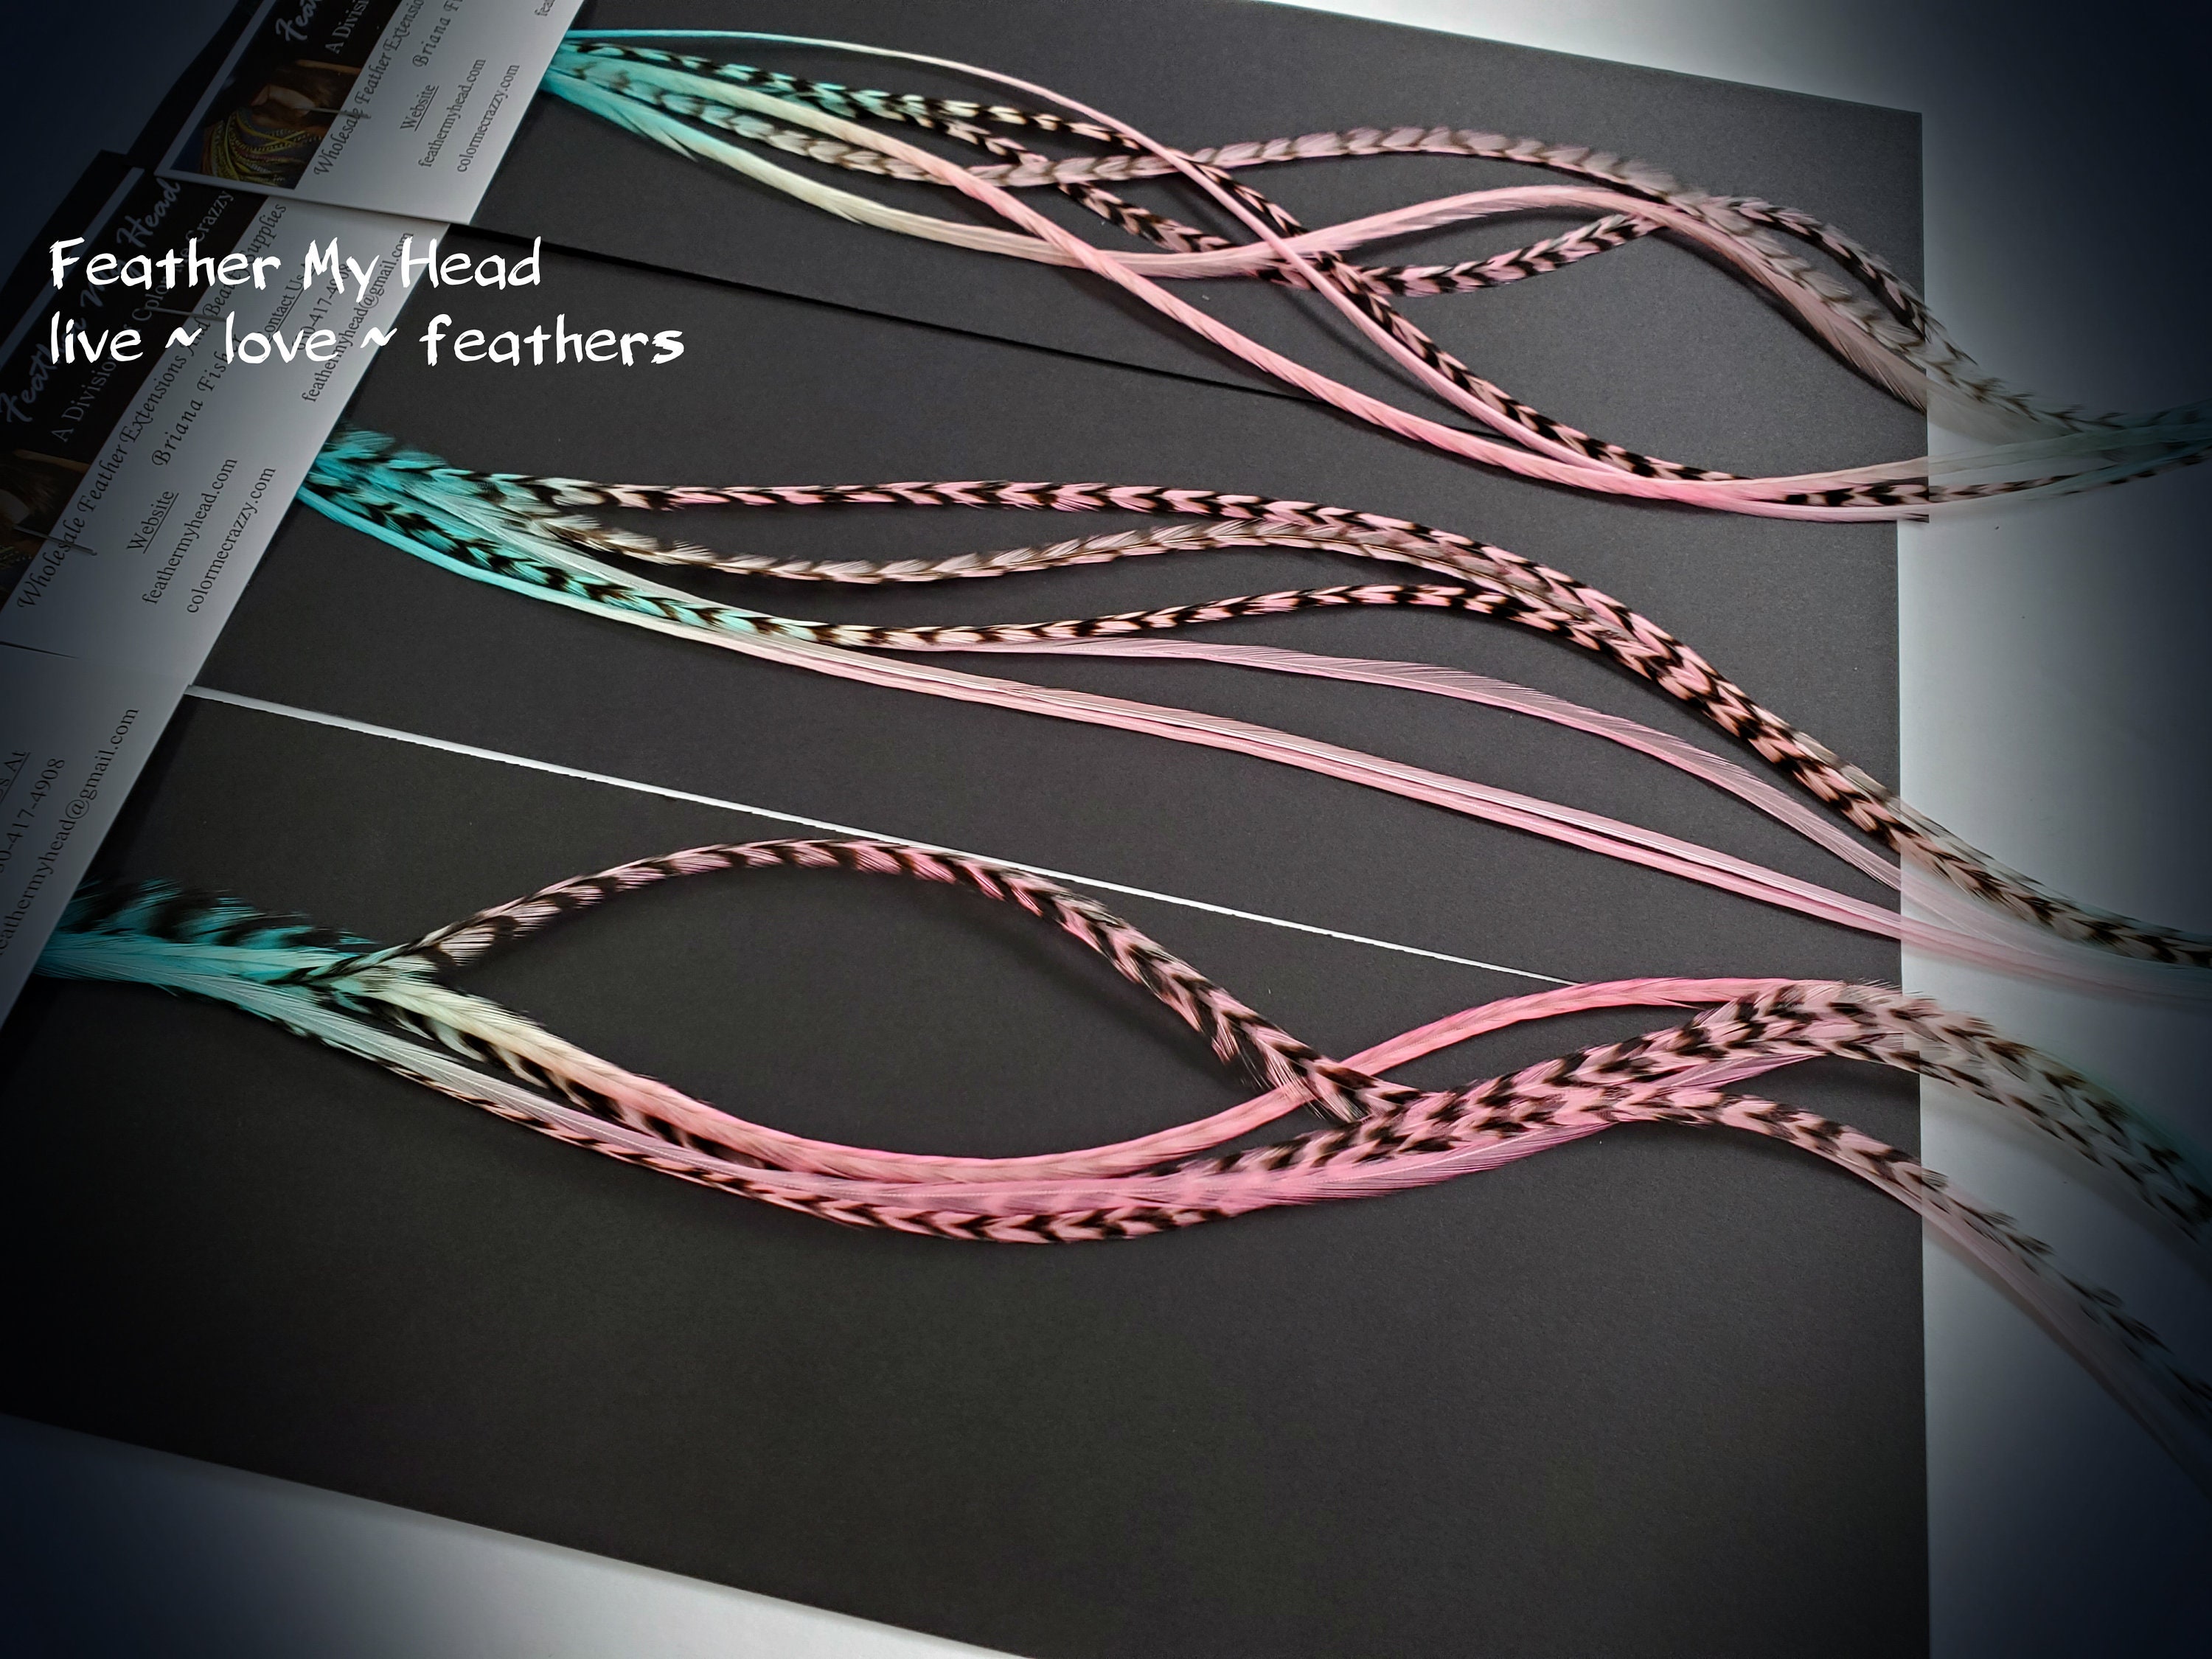 30 Hot Pink & Turquoise Grizzly Color Hair Feathers – 7”- 12” Long –  Feathers For Hair Extension, Rooster Feathers Diy Kit – Eye-catching Design  – 10 Micro-link Beads – 100% Real Rooster Feathers